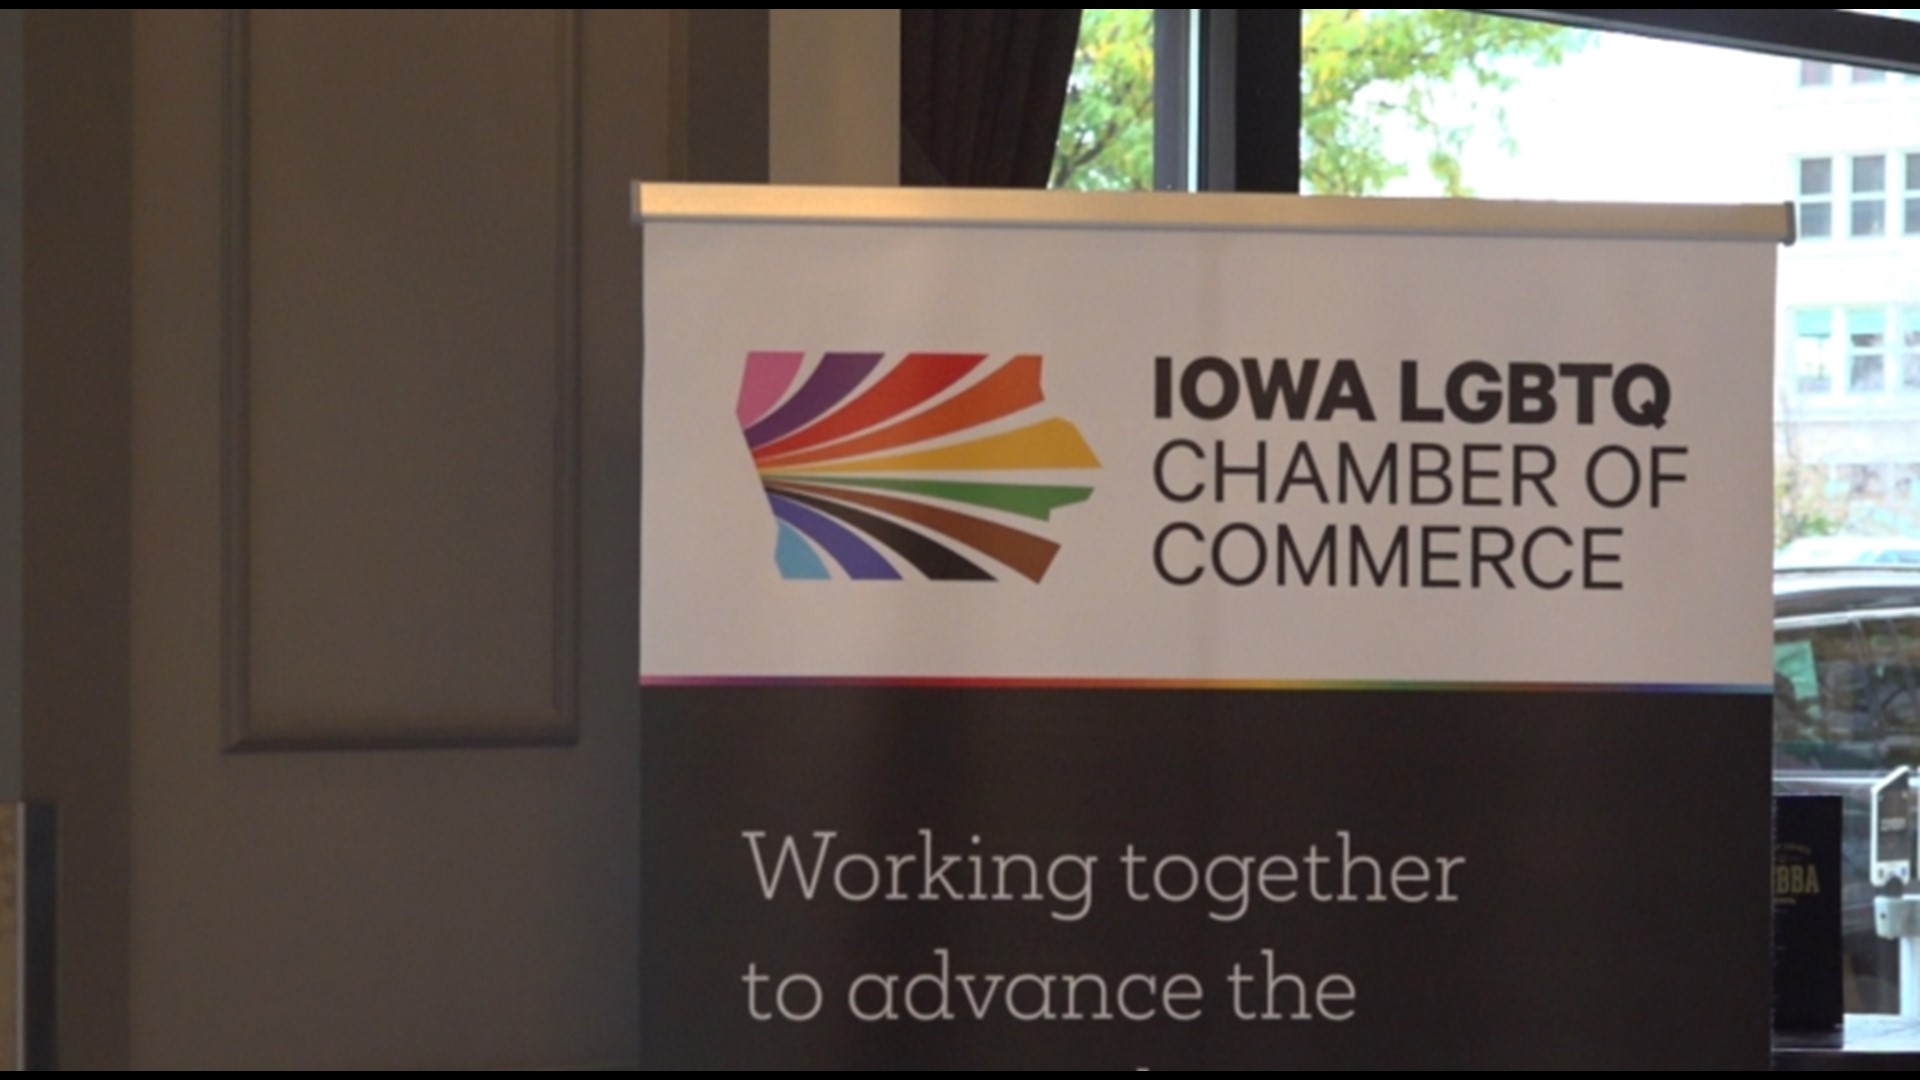 This chamber has goals of bringing together and supporting LGBTQ businesses and entrepreneurs in Iowa.